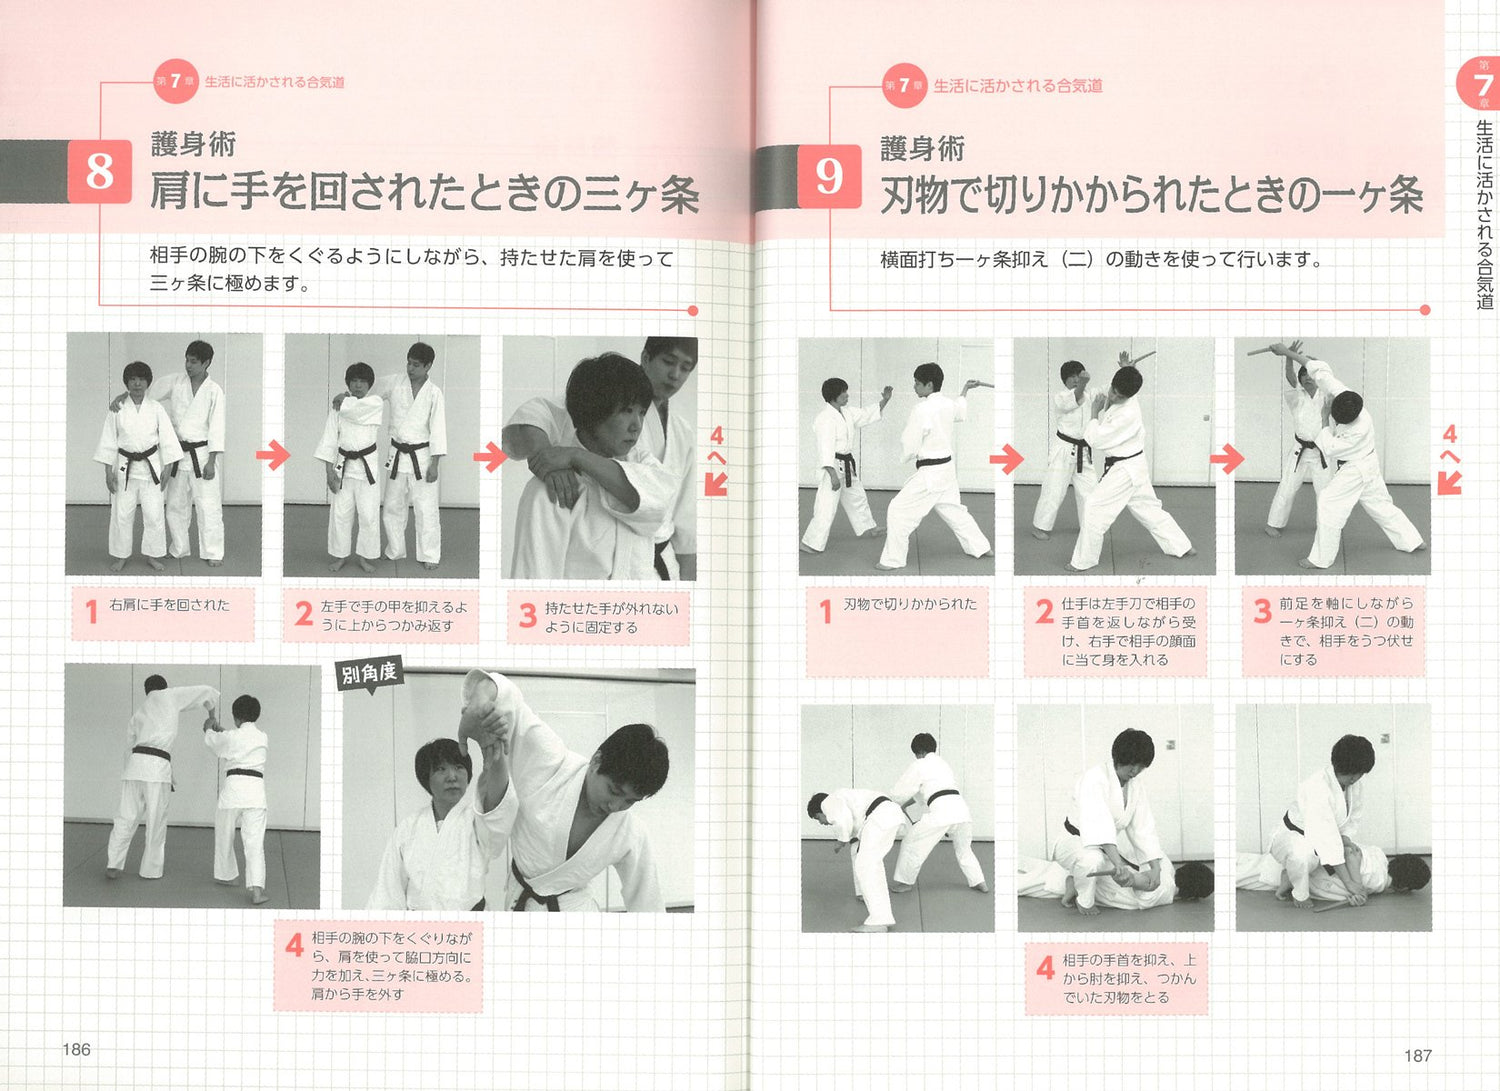 Aikido for Beginners: Strengthen Mind & Body for Self Defense & Health Book by Susumu Chino